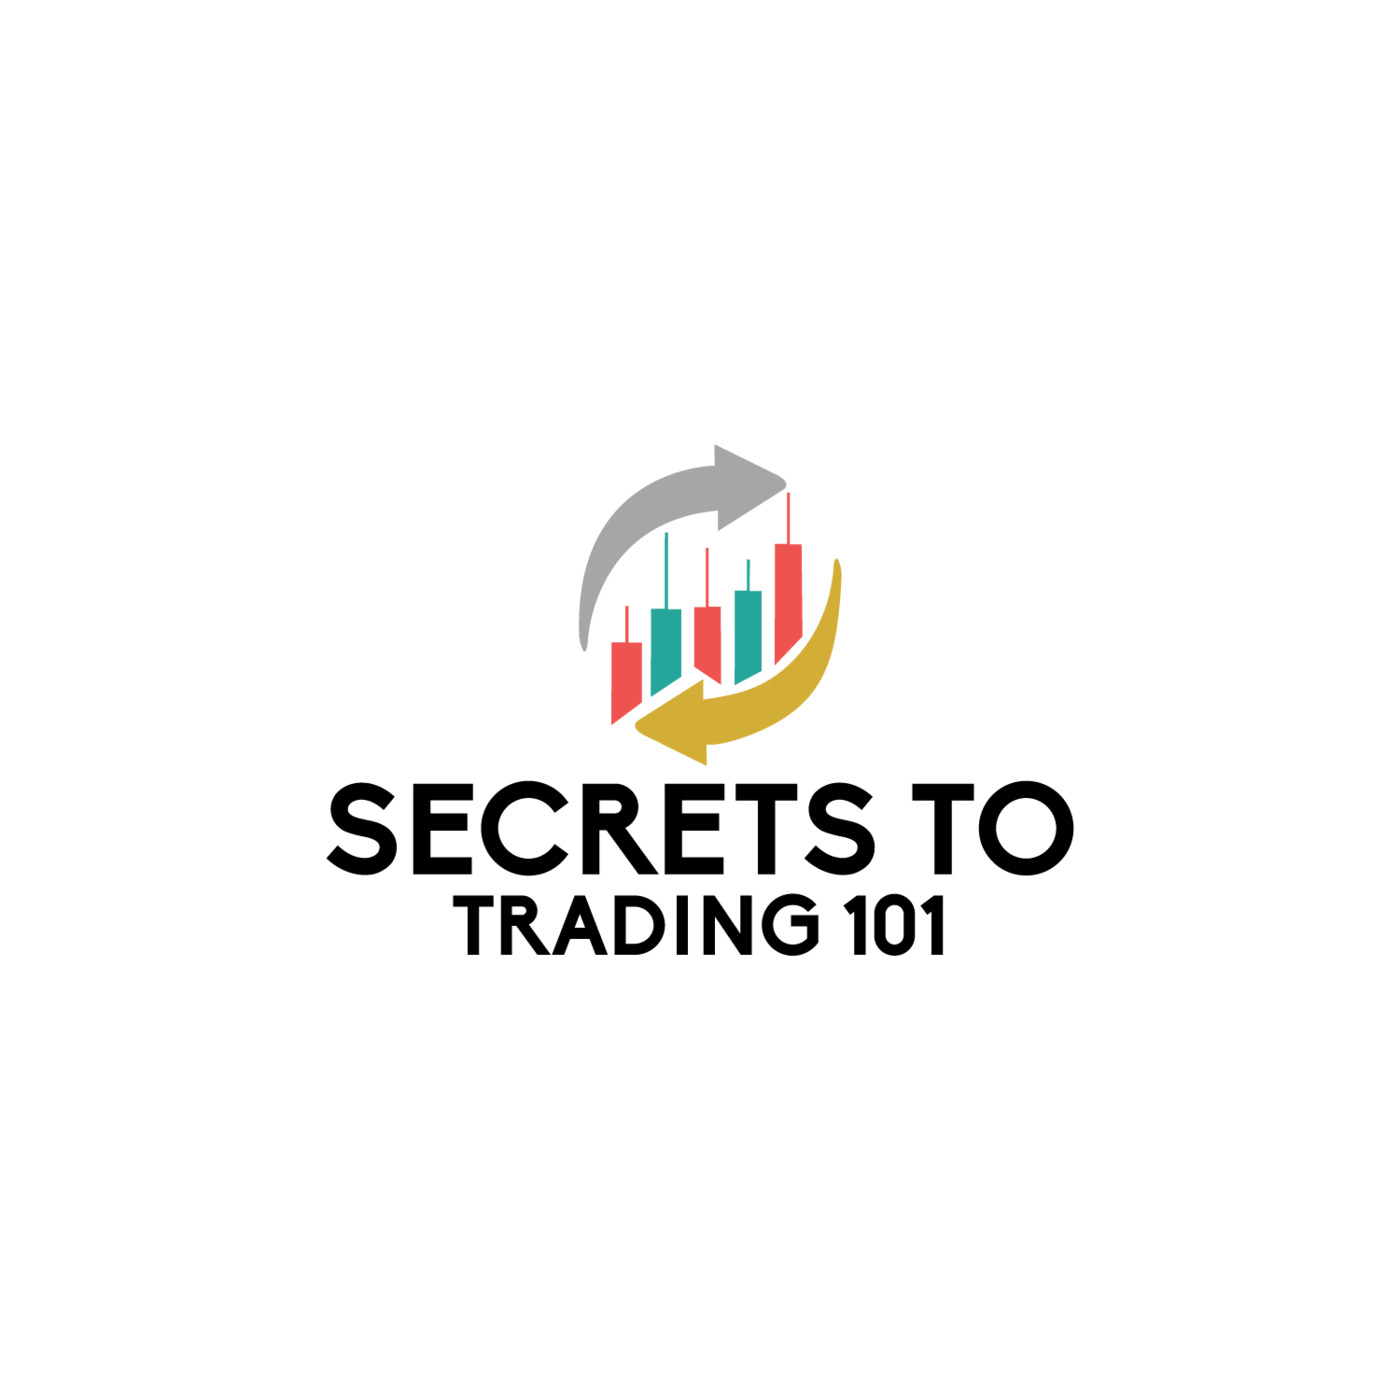 Secrets to Trading 101 is a platform offering traders and investors expert insights on forex, crypto, and trading.